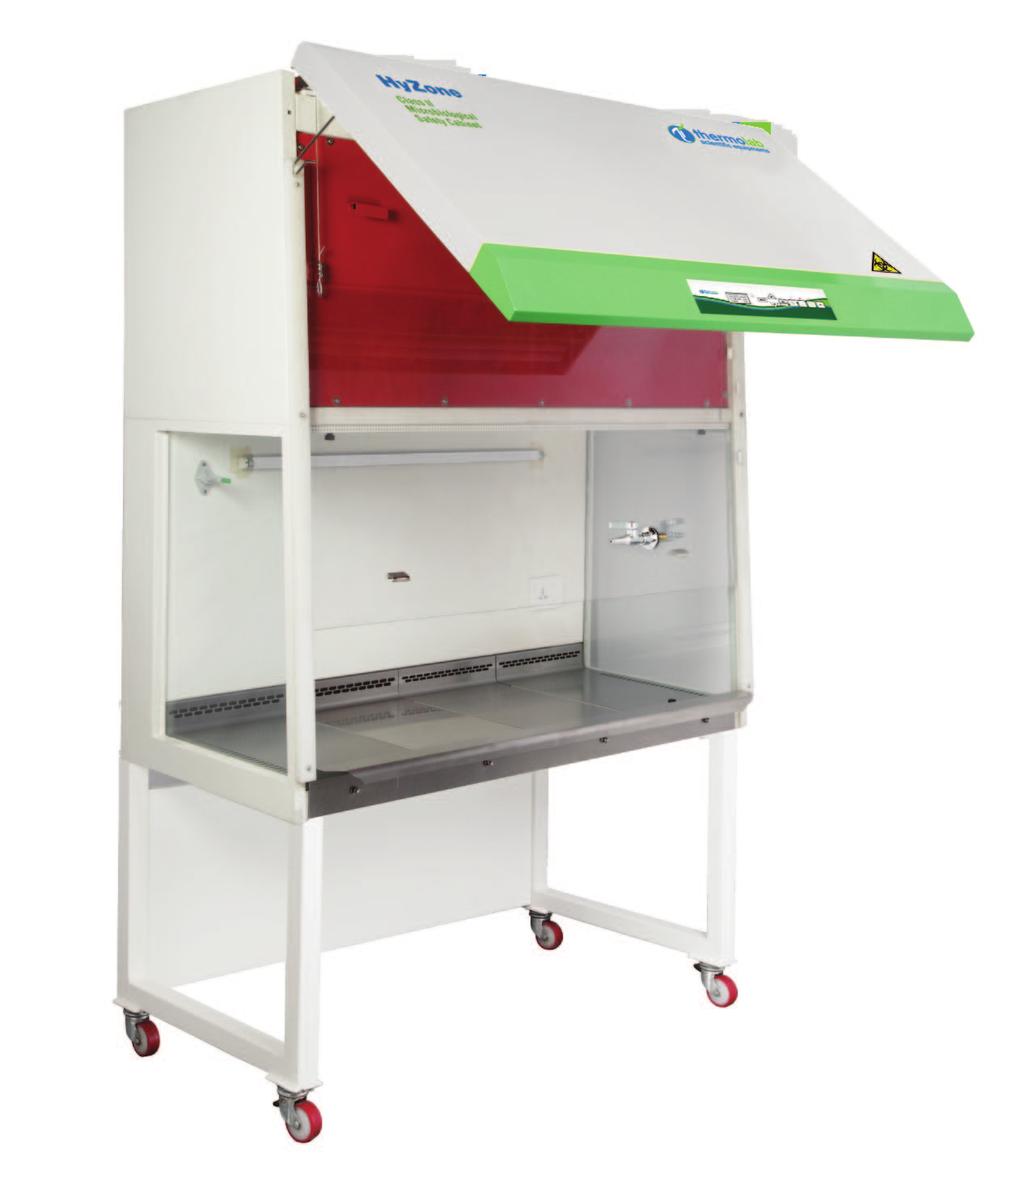 Microbiological Safety Cabinets Microbiological Safety Cabinets are used to give operator, environment and product protection when handling dangerous biological materials.